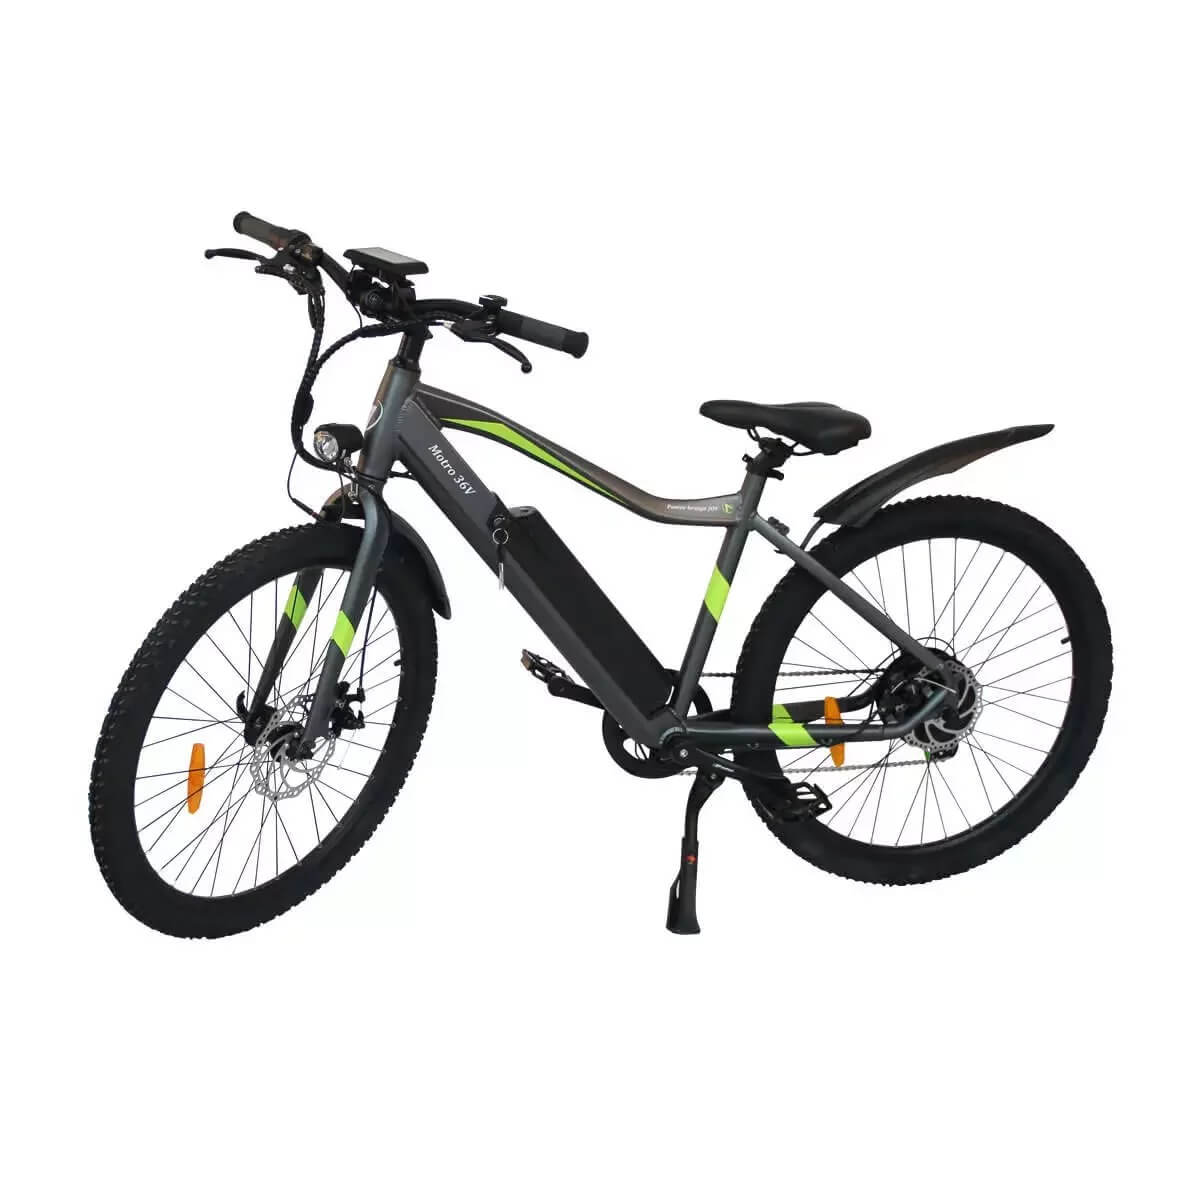 Aostirmotor Ebikes S03 City Commuter Electric Bike-Commuter-Aostirmotor Ebikes-Right Side View